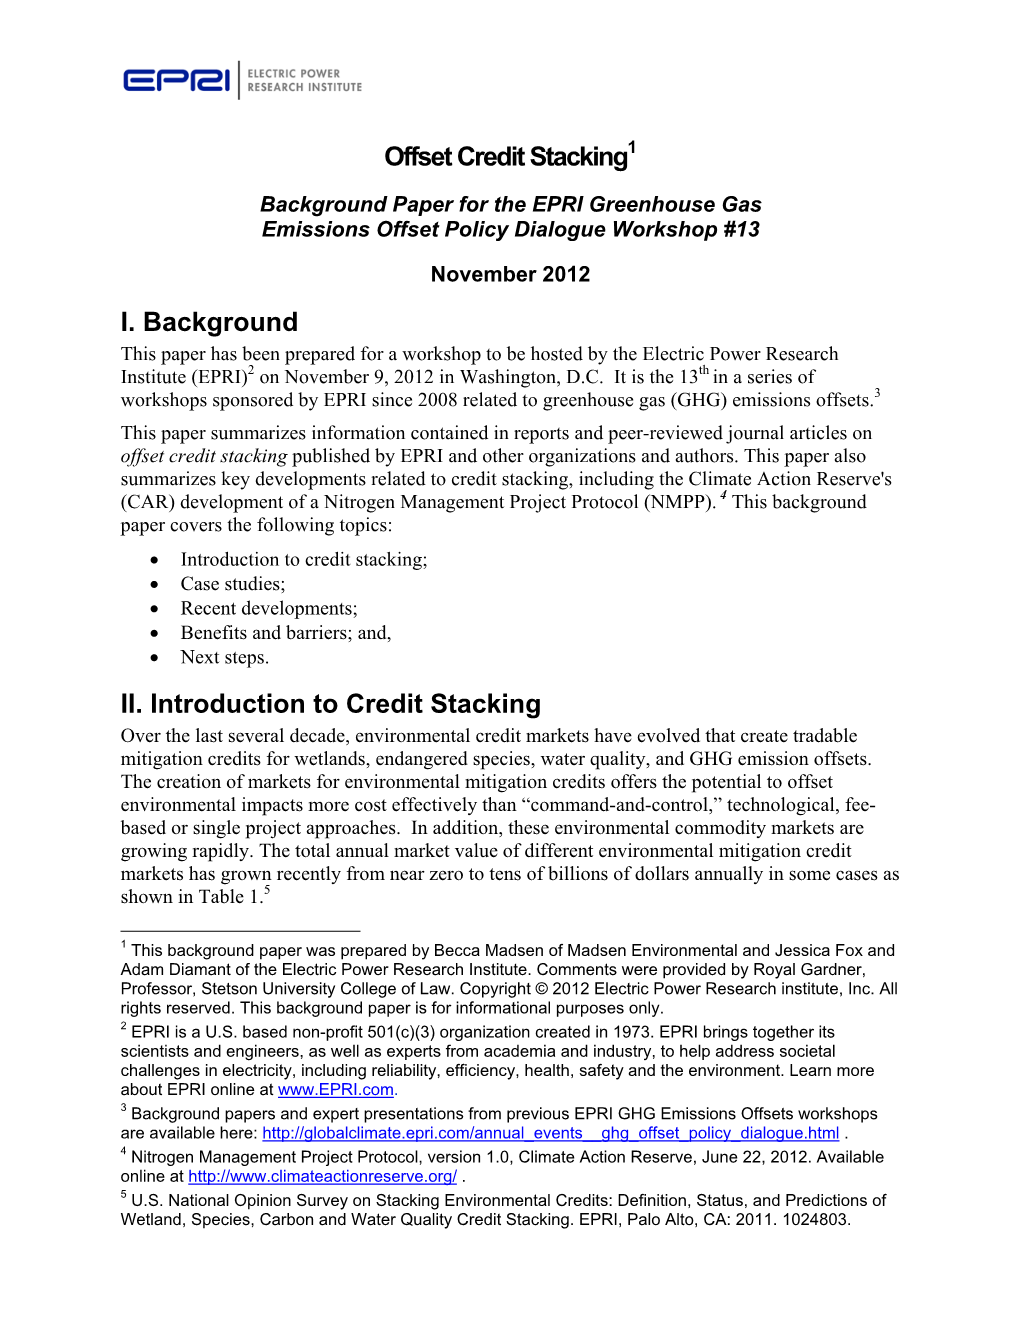 Background Paper: Offset Credit Stacking